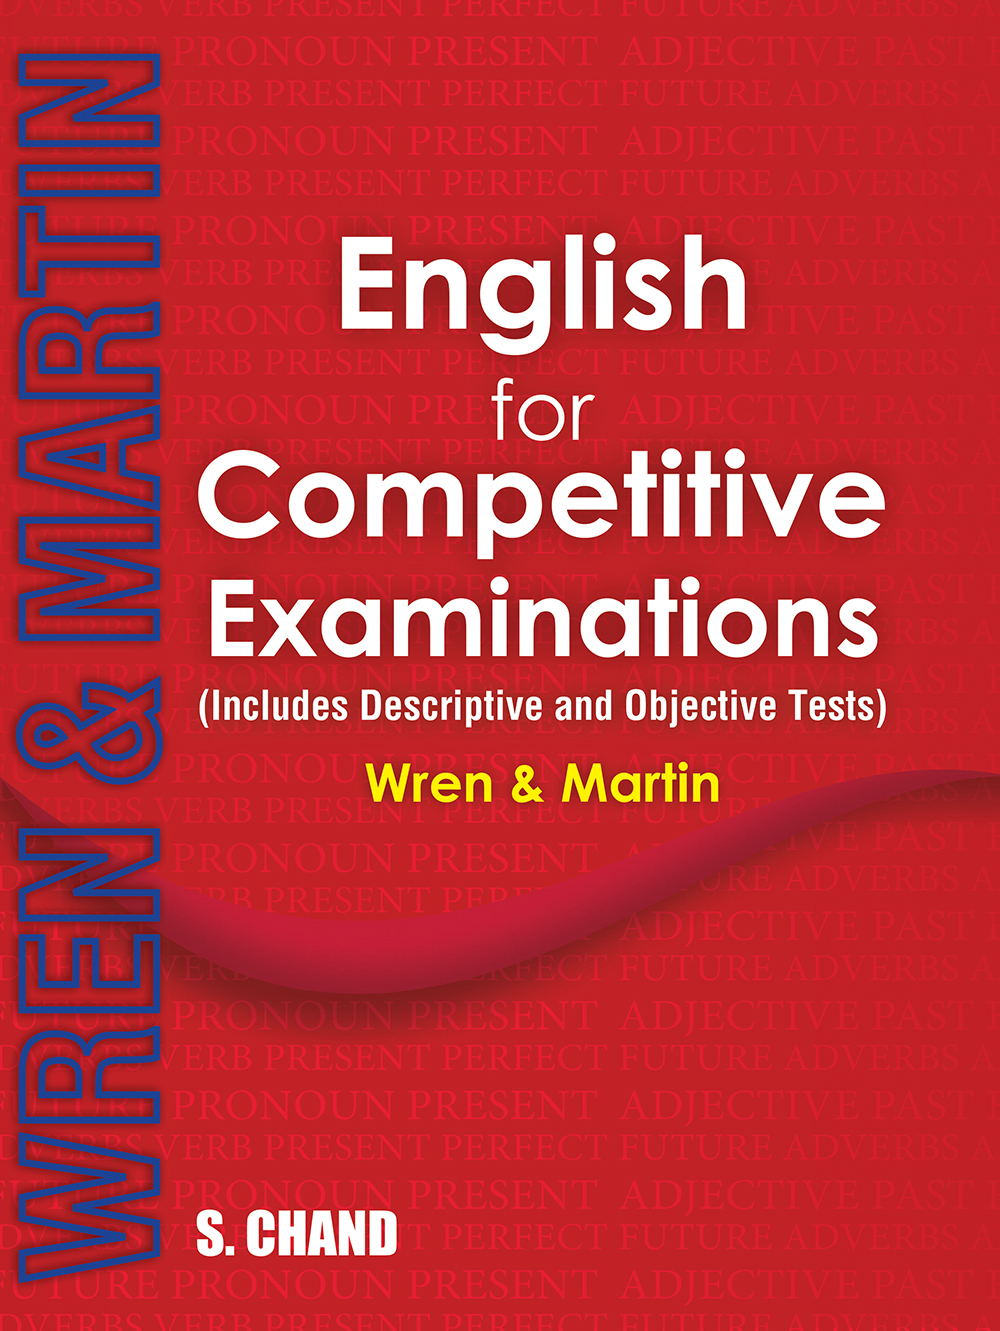 English for Competitive Examinations: <Span Class="Subtitlevalue">(Includes Descriptive and Objective Tests) </Span>